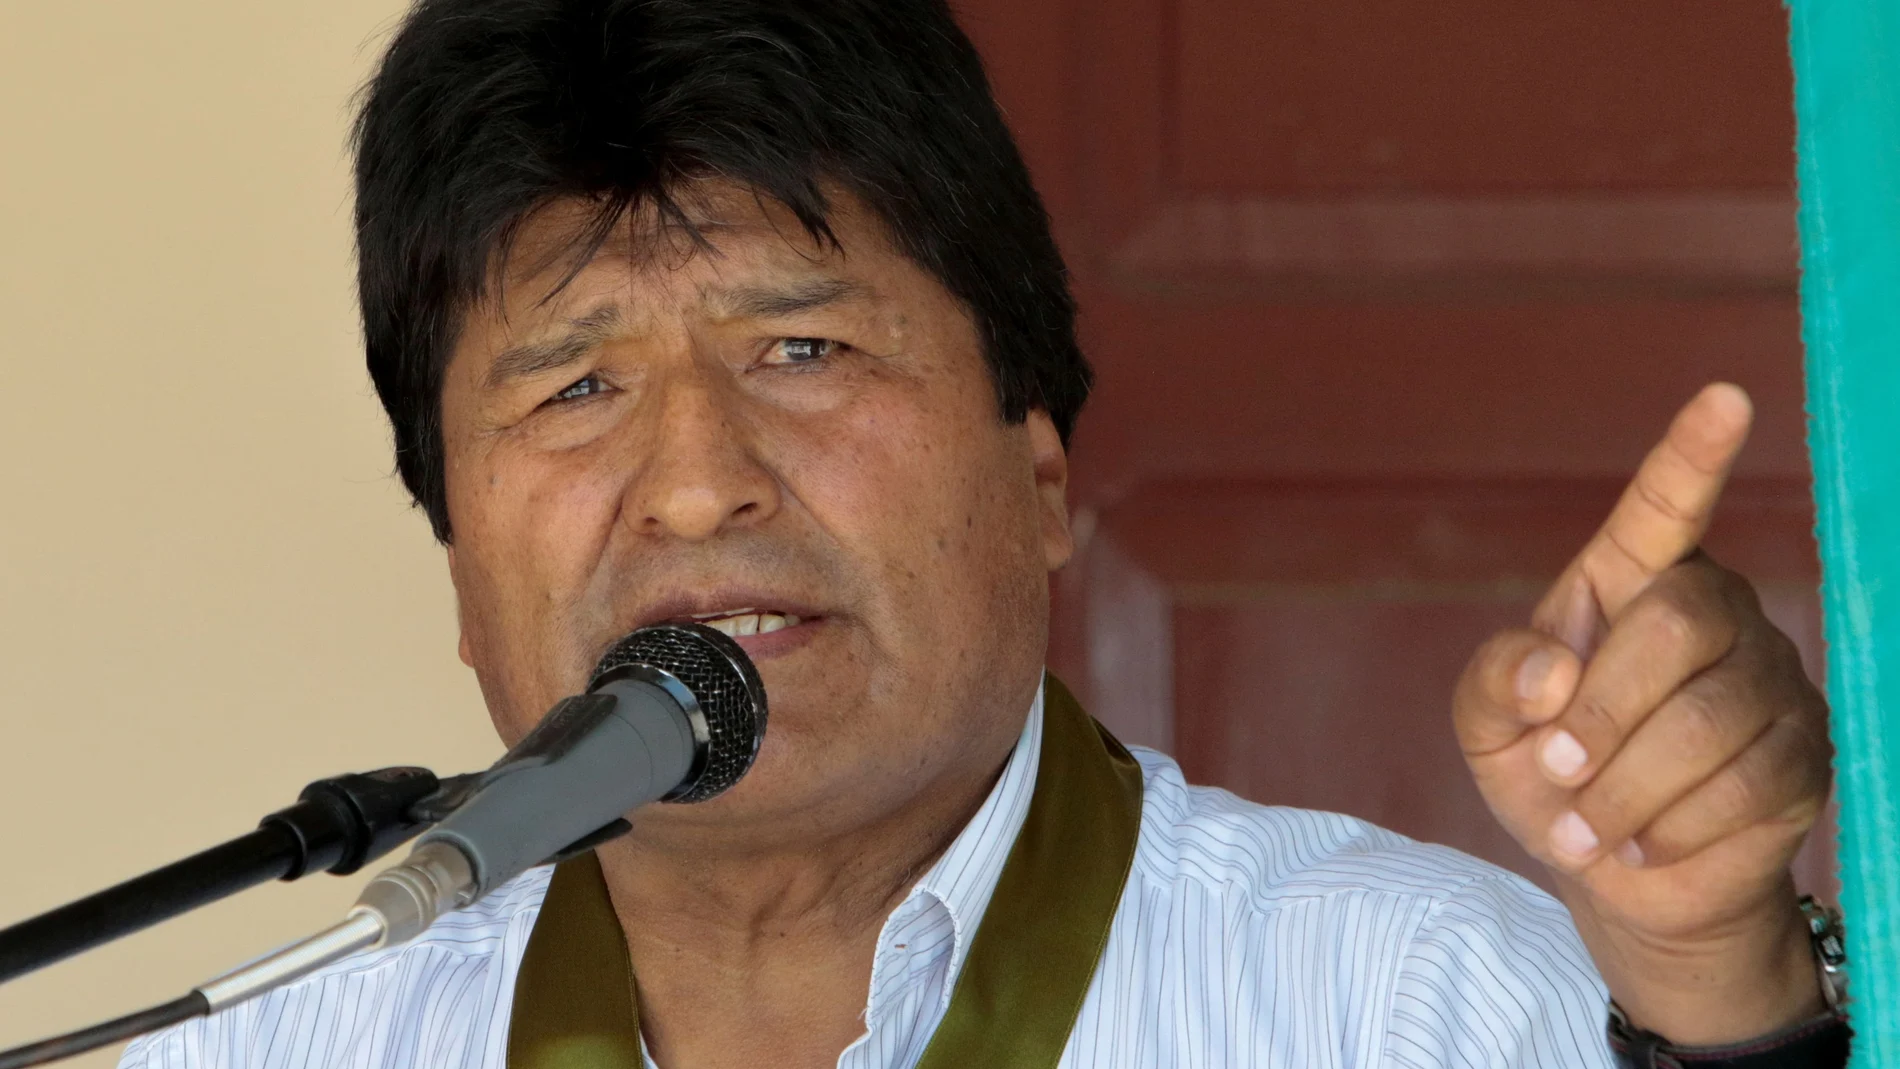 FILE PHOTO: Bolivia's President Evo Morales, who turns 60 today, speaks during a ceremony at the UMOPAR barracks in Chimore